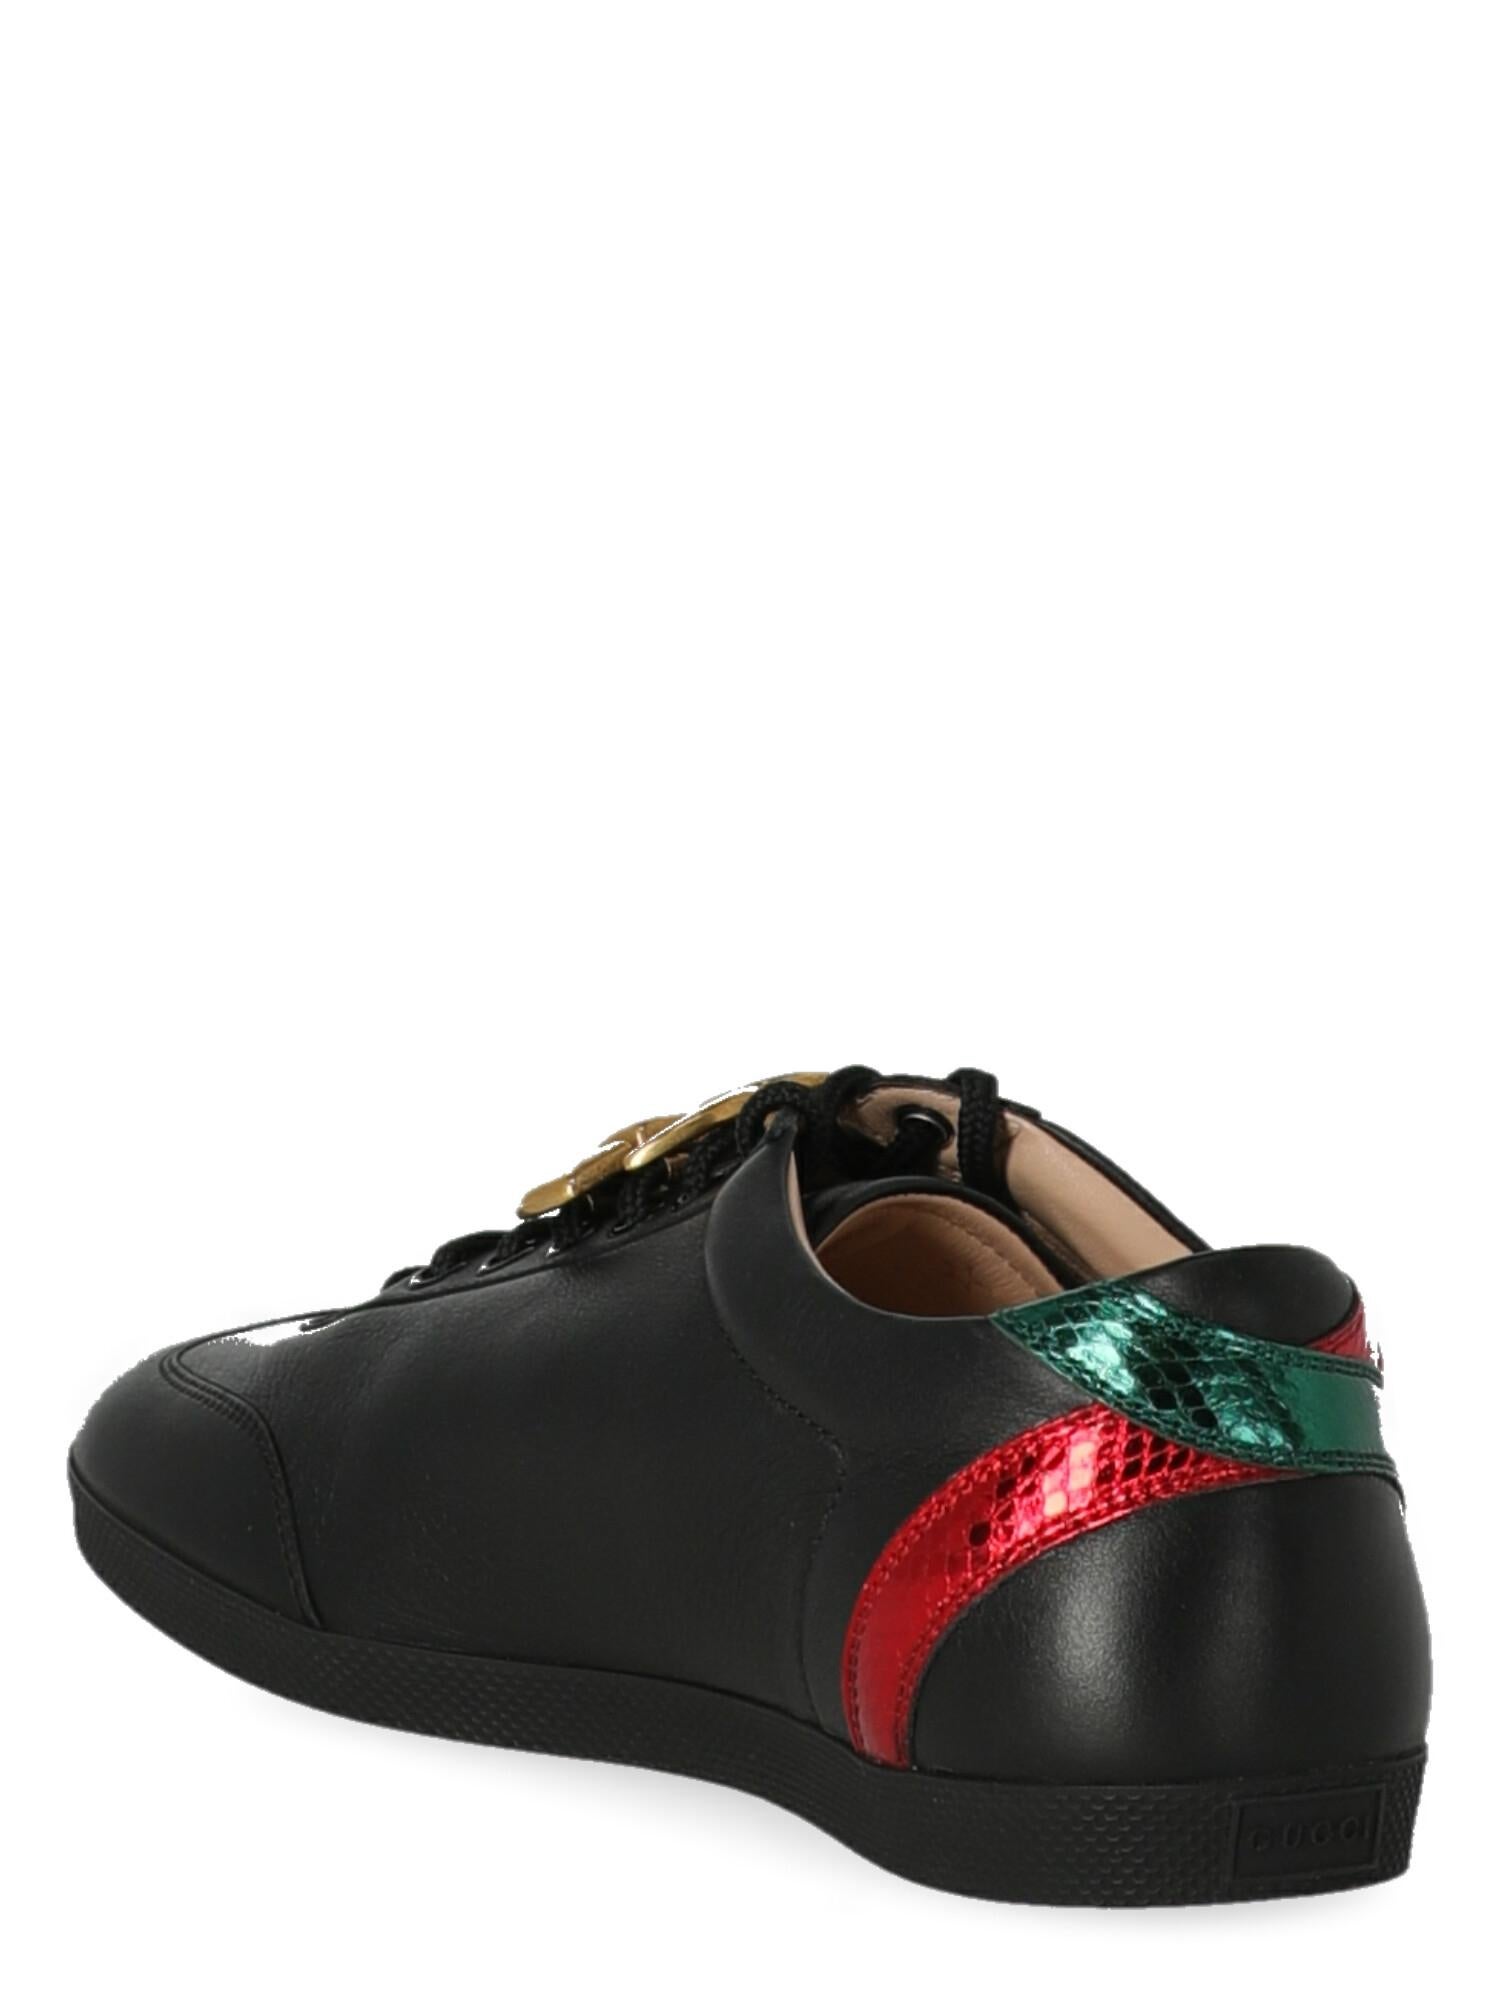 Gucci  Women   Sneakers  Black, Green, Red Leather EU 41.5 In Excellent Condition For Sale In Milan, IT